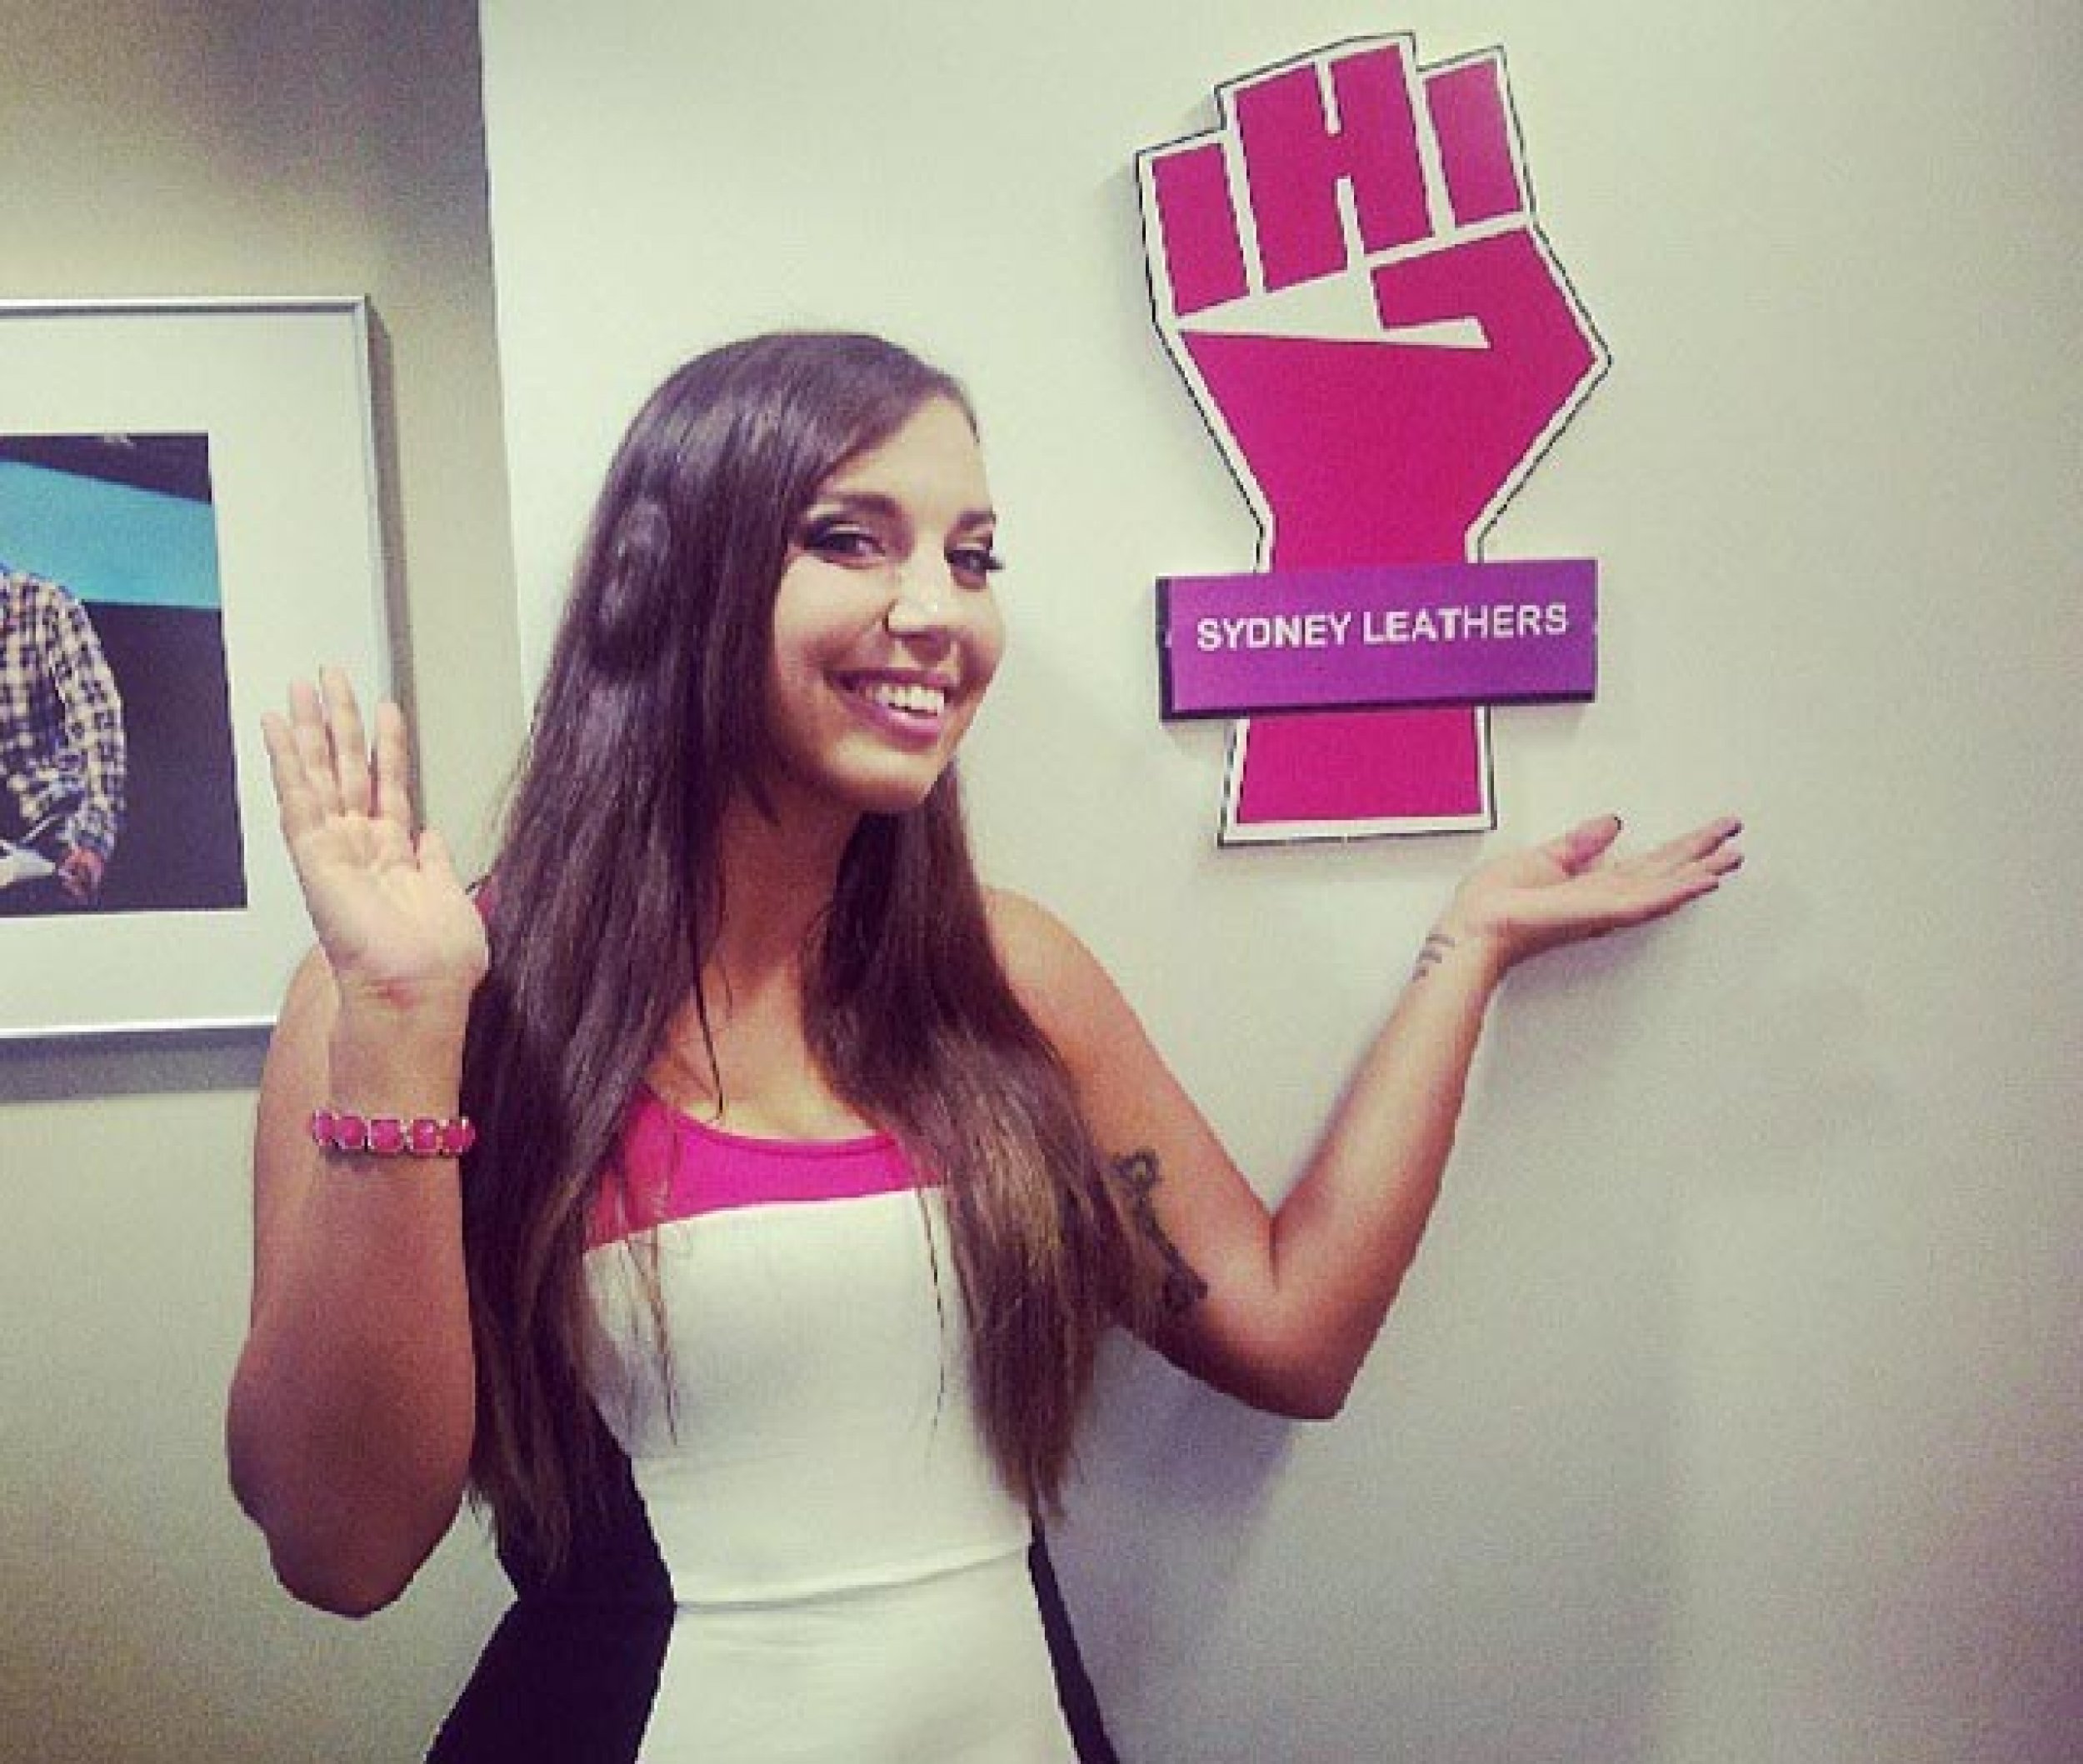 Sydney Leathers Talks Anthony Weiner On Howard Stern Show Is He Really This Dumb [video]